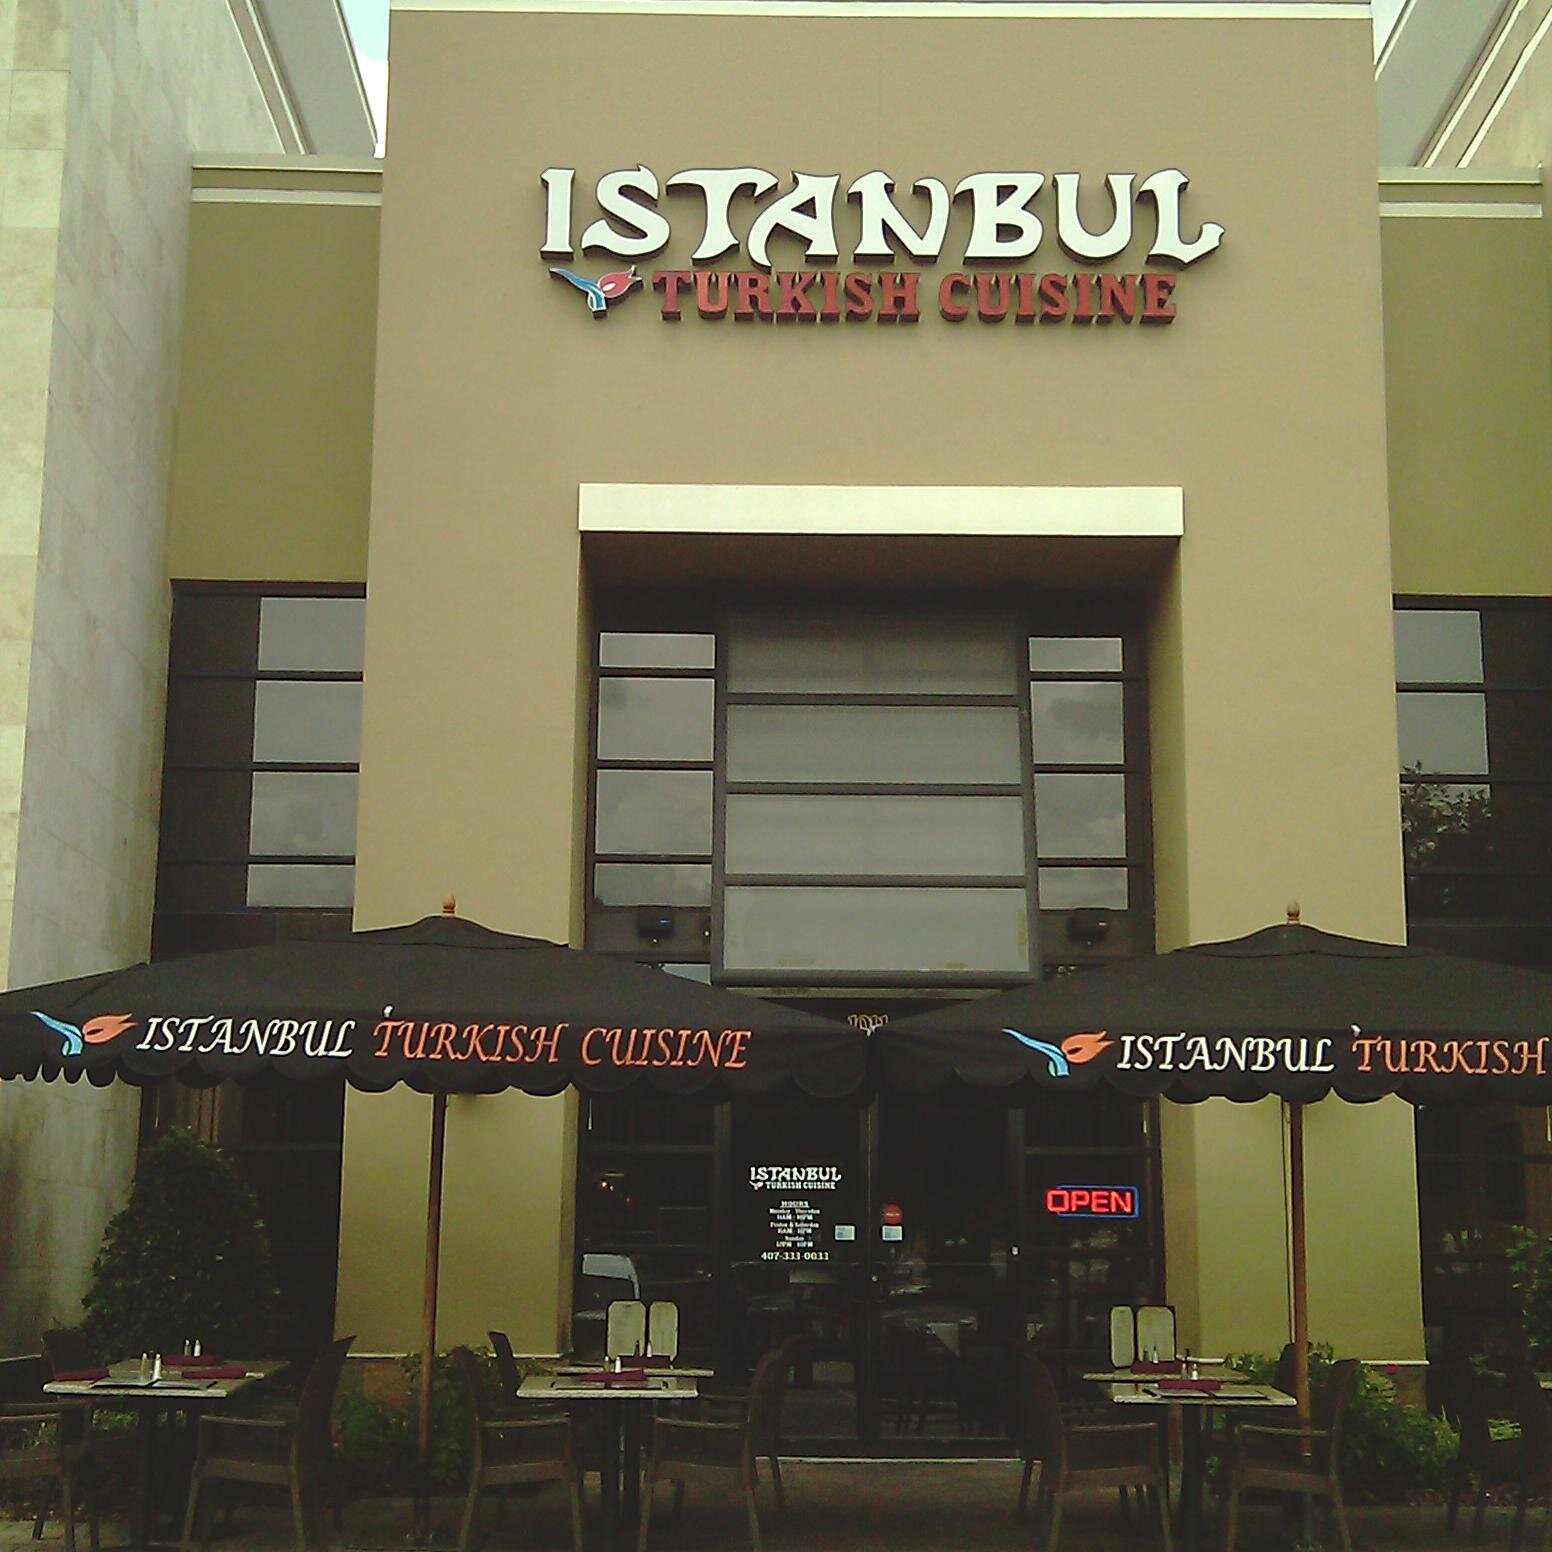 Istanbul Turkish Cuisine
Authentic Turkish Cuisine 
7025 County Rd 46A 
Lake Mary, Fl 32746
Tel: 407-333-0033
http://t.co/8qjMCYkOk5